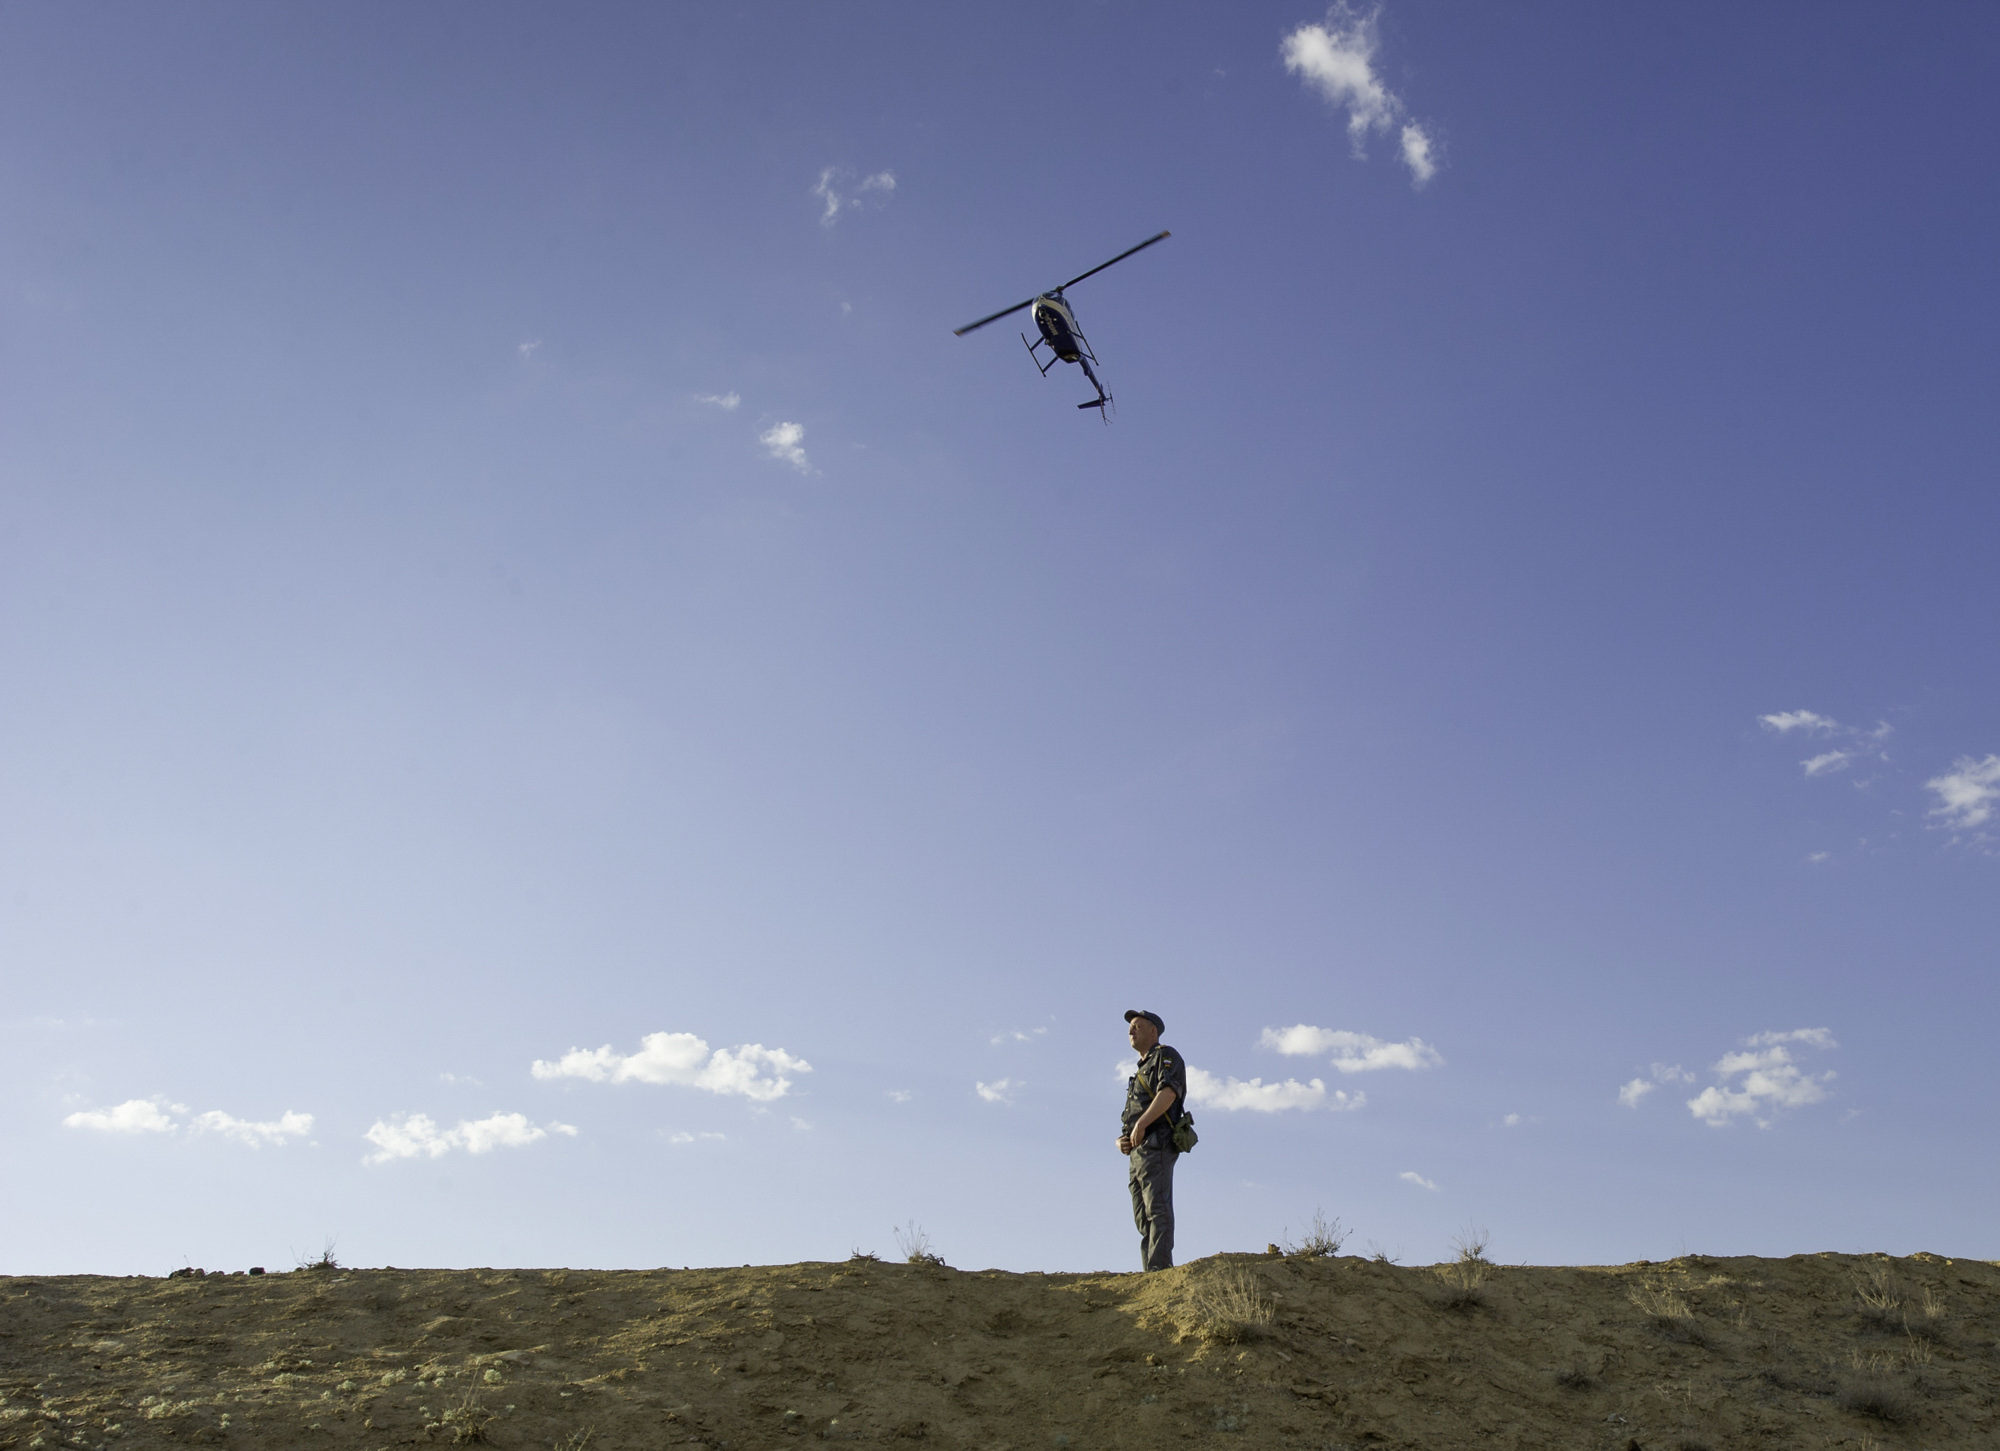  A Russian security guard stands watch as a Russian military helicopter flies overhead during the rollout of the Soyuz TMA-02M rocket to the launch pad at the Baikonur Cosmodrome in Kazakhstan on Sunday, June 5, 2011. (NASA/Carla Cioffi) 